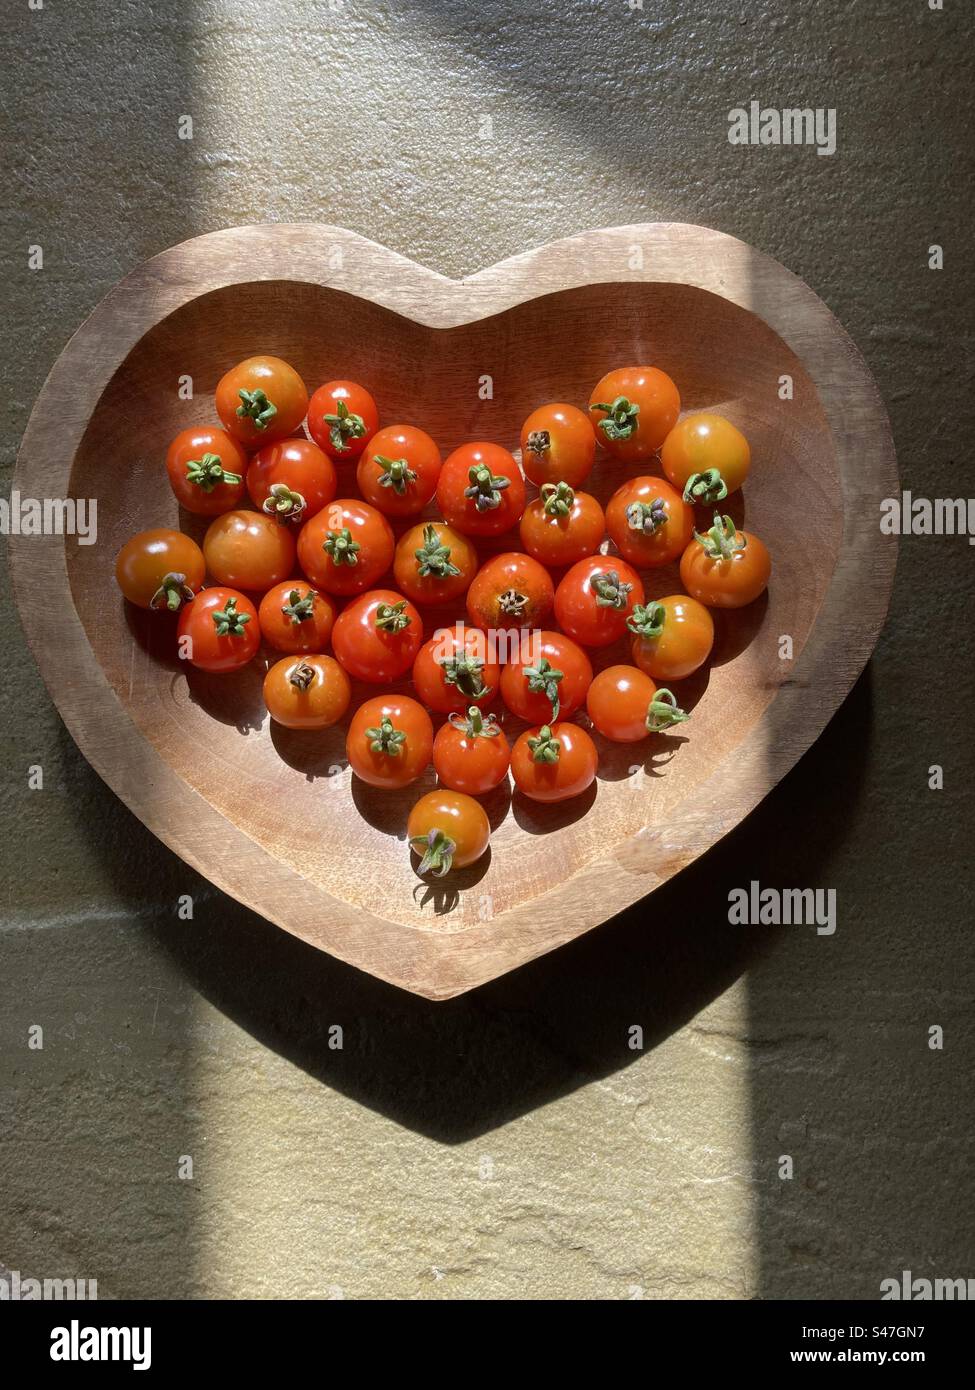 Heart shaped wooden bowl with home grown cherry tomatoes in a shaft of sunlight Stock Photo